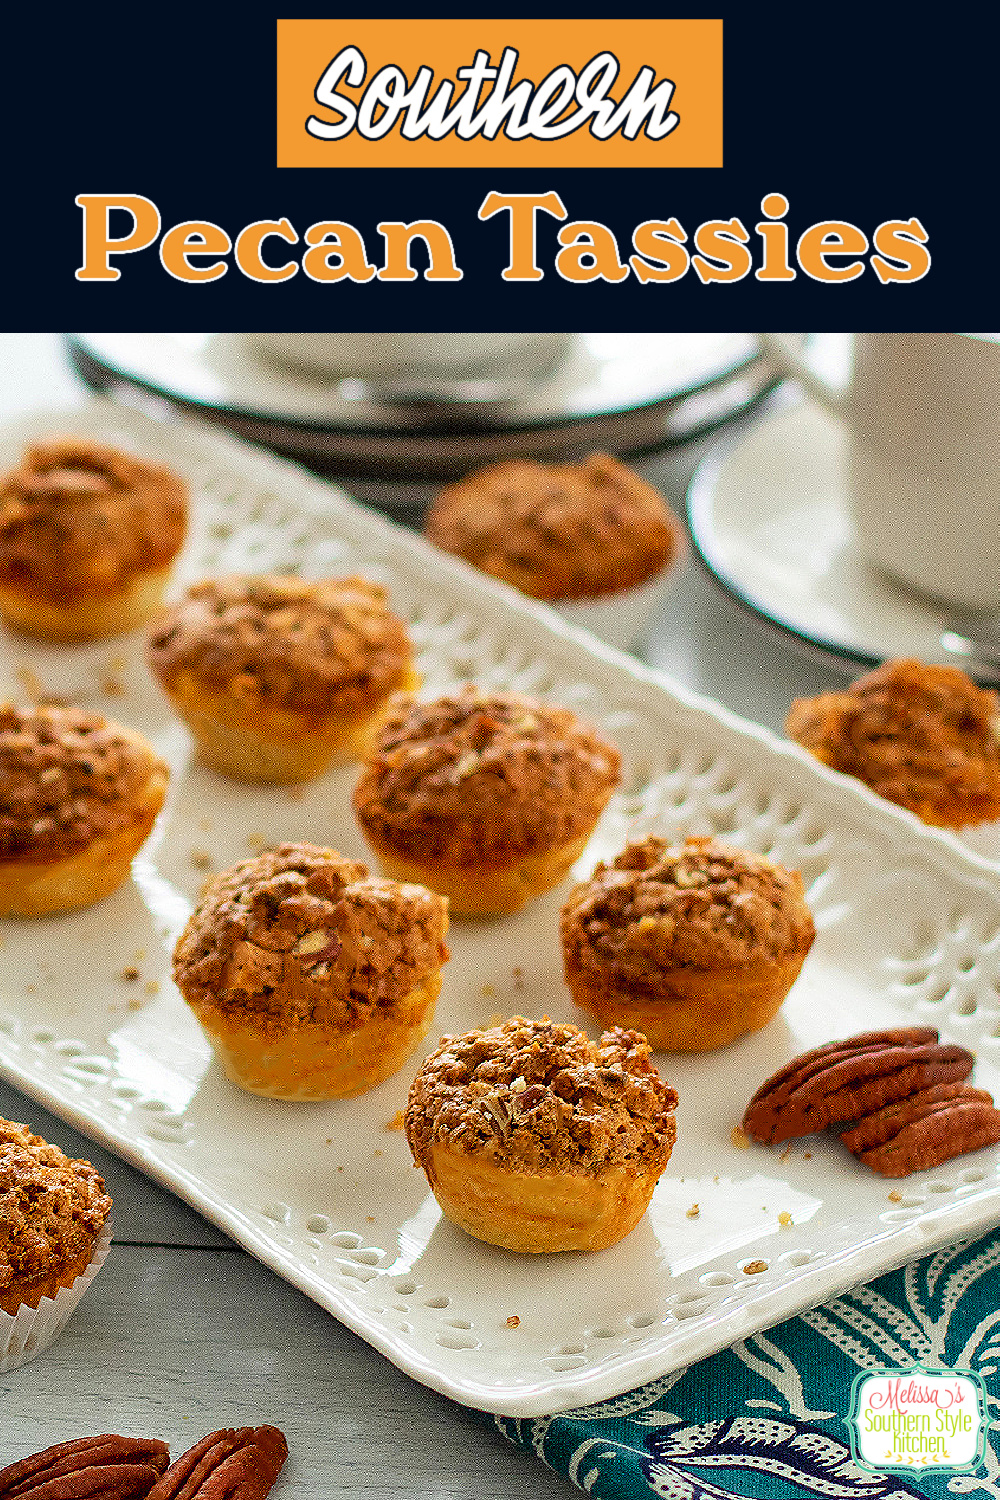 These two bite Southern Pecan Tassies are perfect for holidays, tea parties and any event when bite size sweets are on the menu #pecantassies #pecancookies #pecanpie #pecandesserts #minidesserts #tassies #tassierecipes